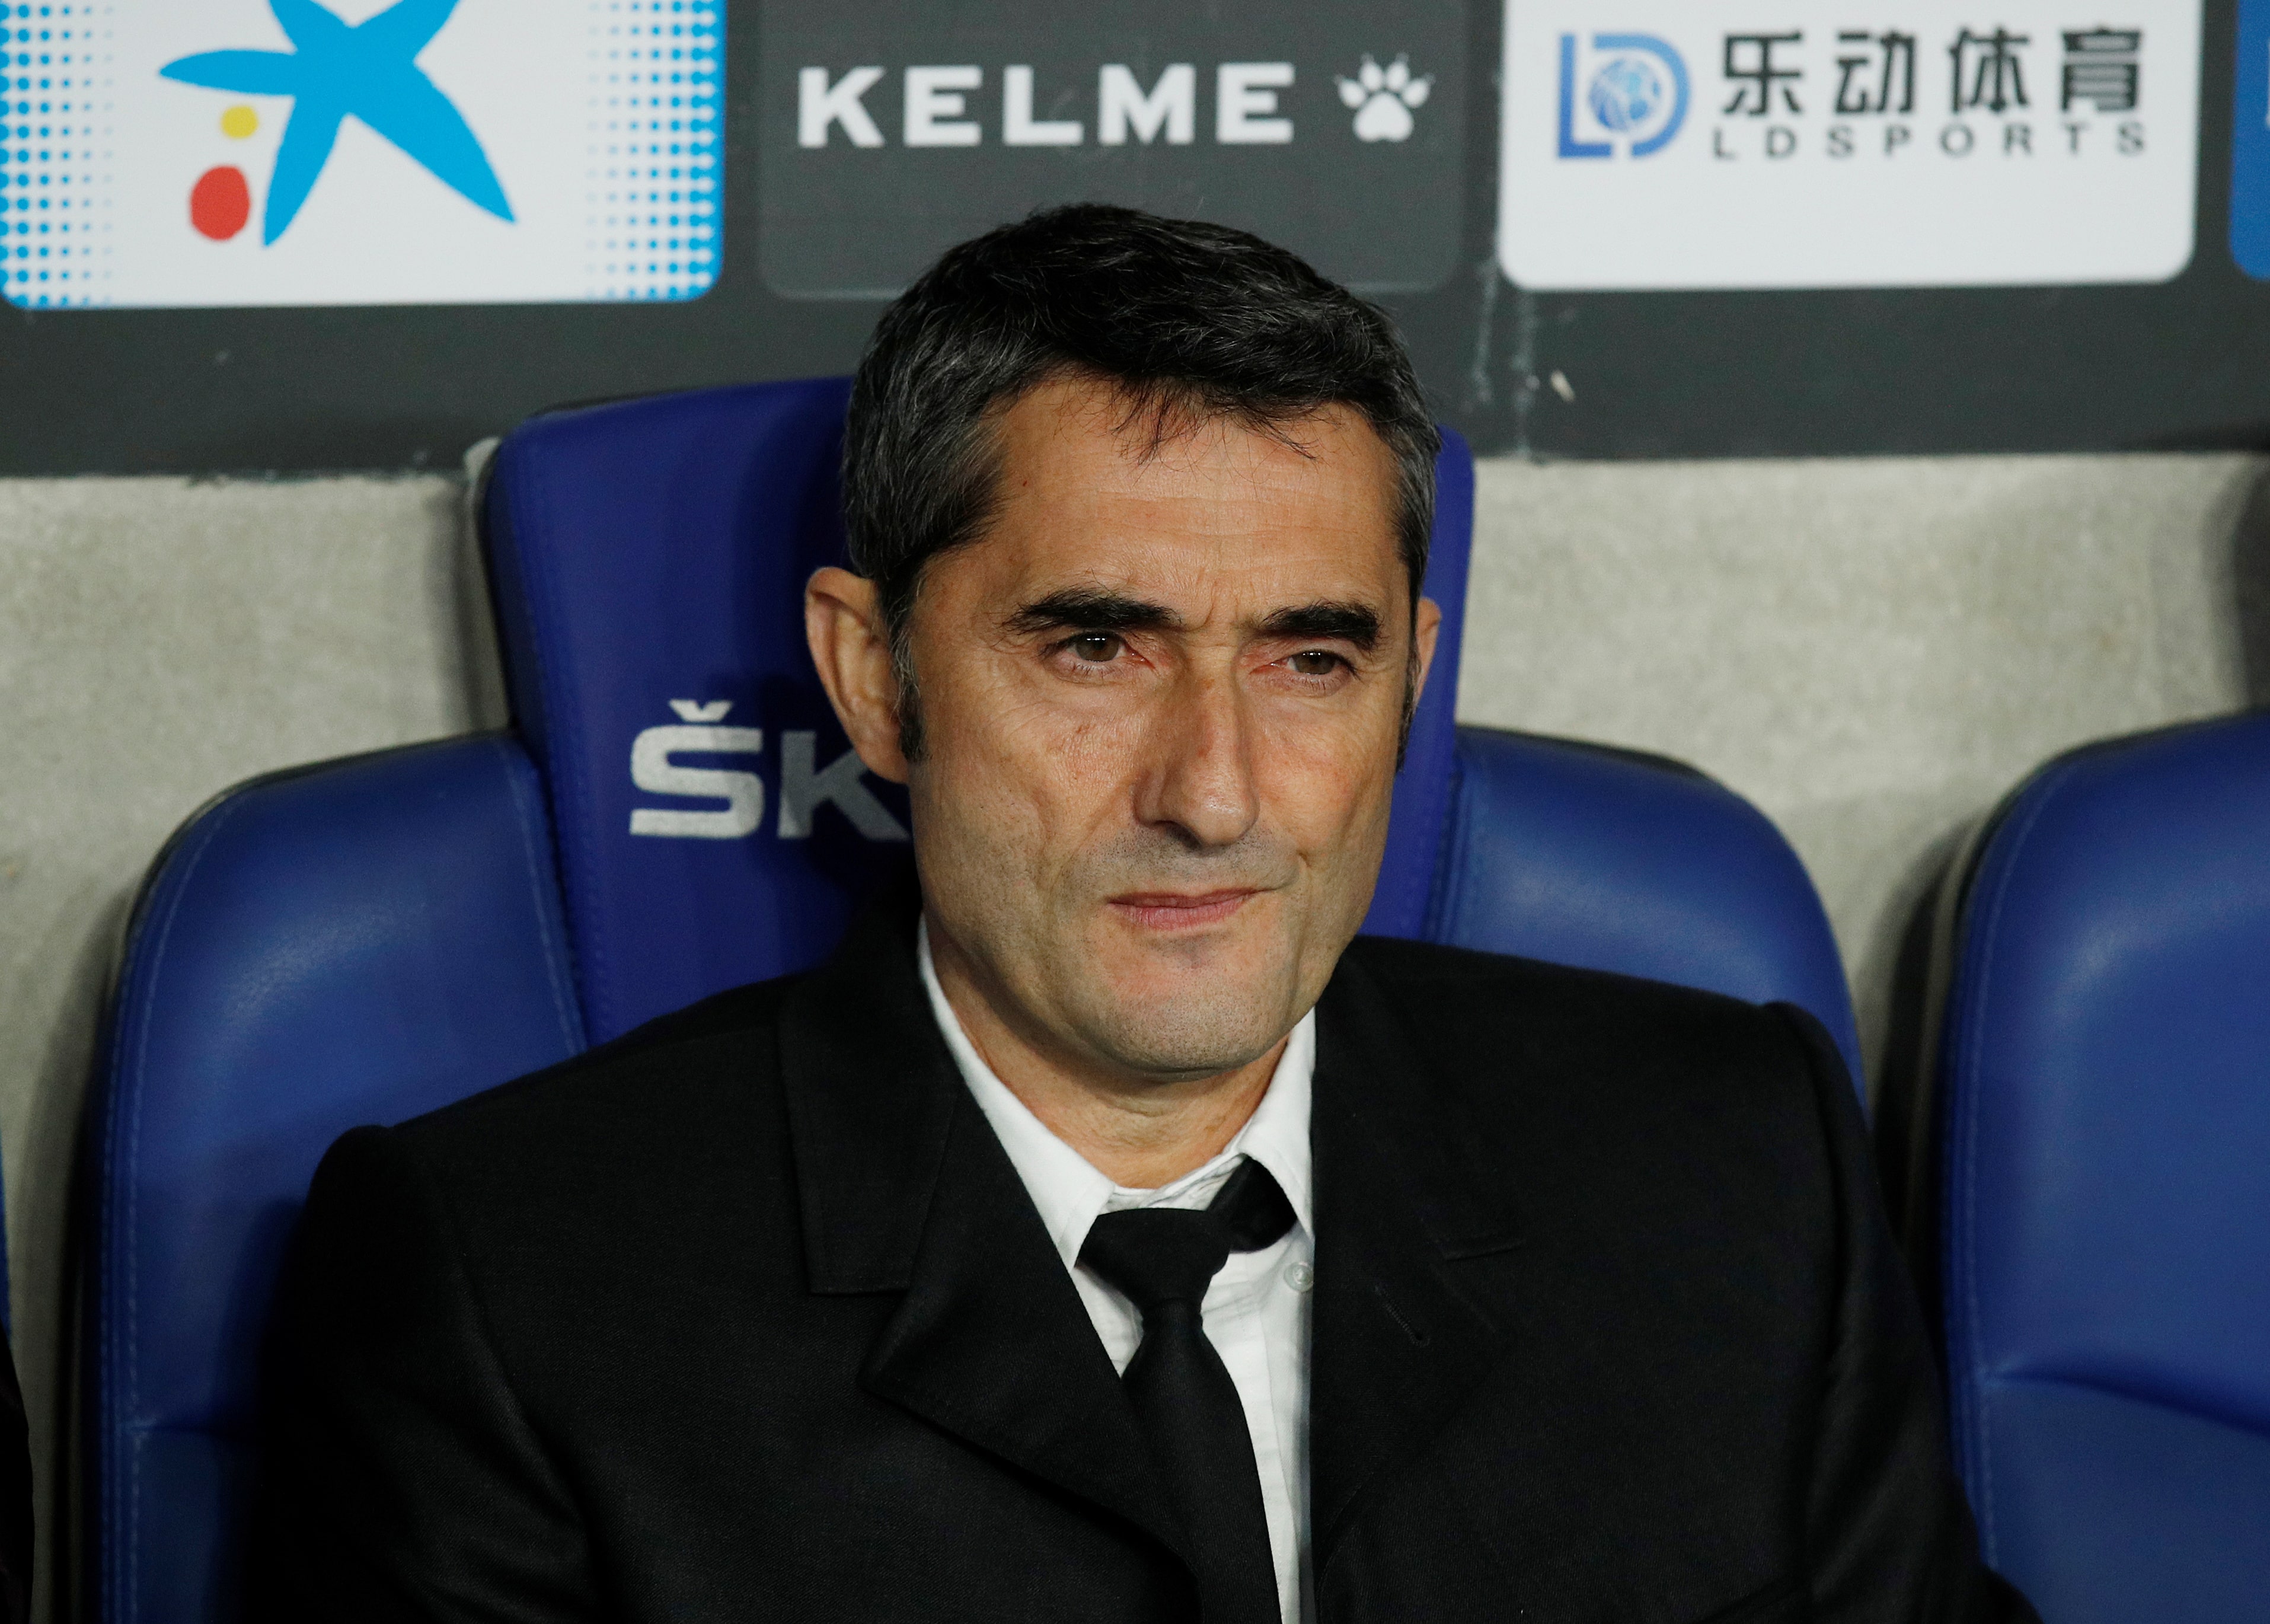 FC Barcelona manager Ernesto Valverde on the bench (by Albert Gea/Reuters)